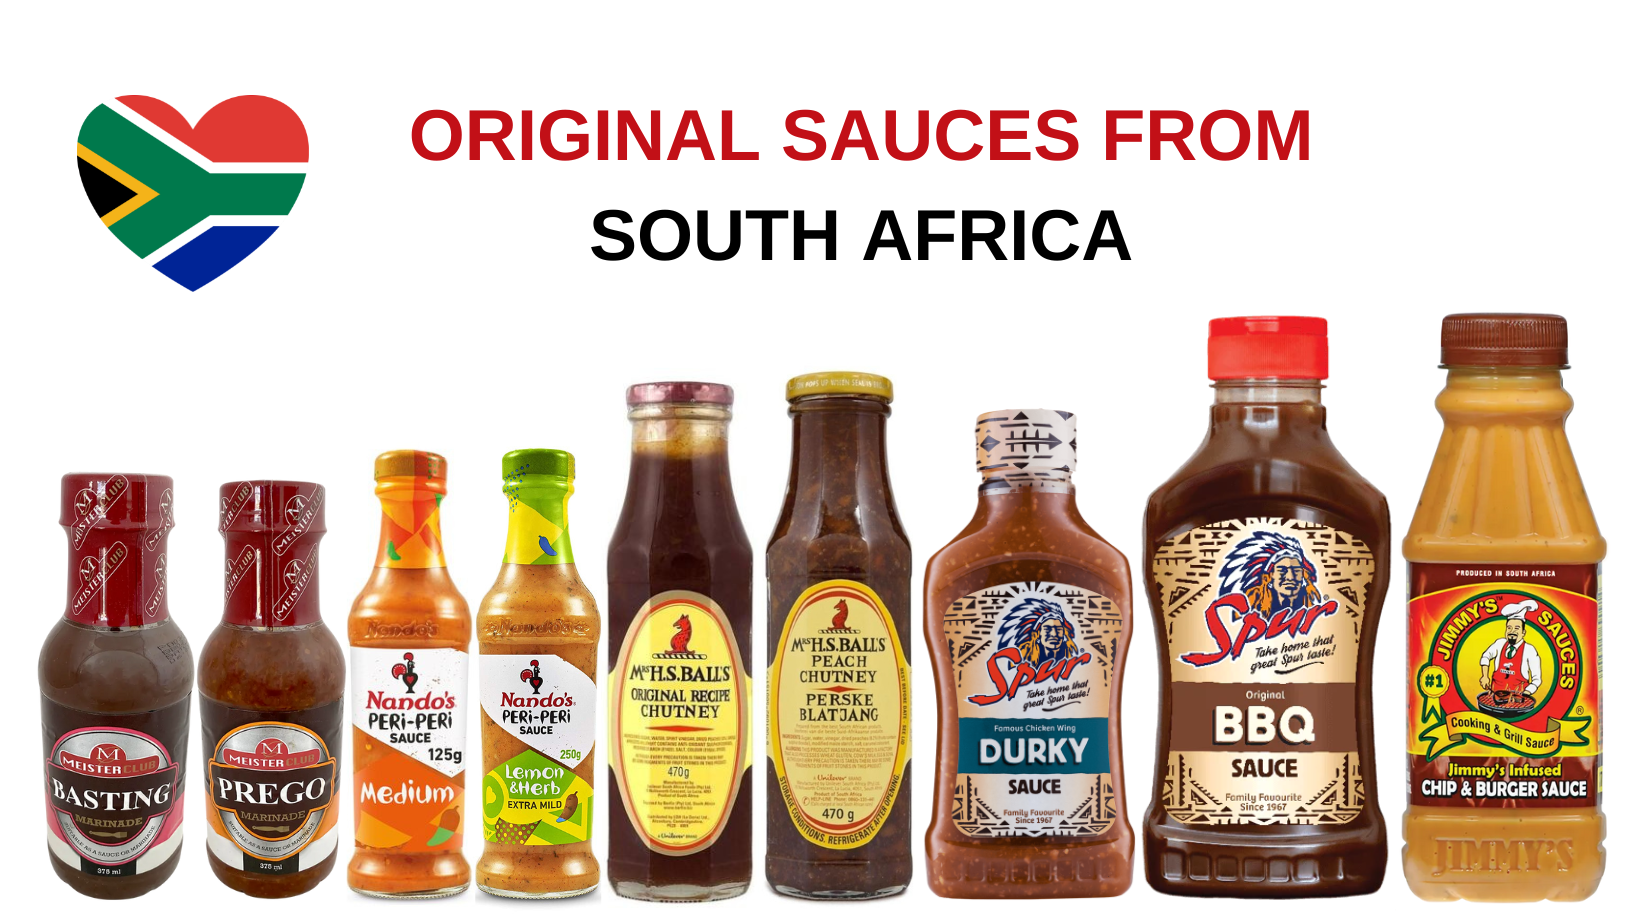 ORIGINAL SAUCES FROM SOUTH AFRICA (1)